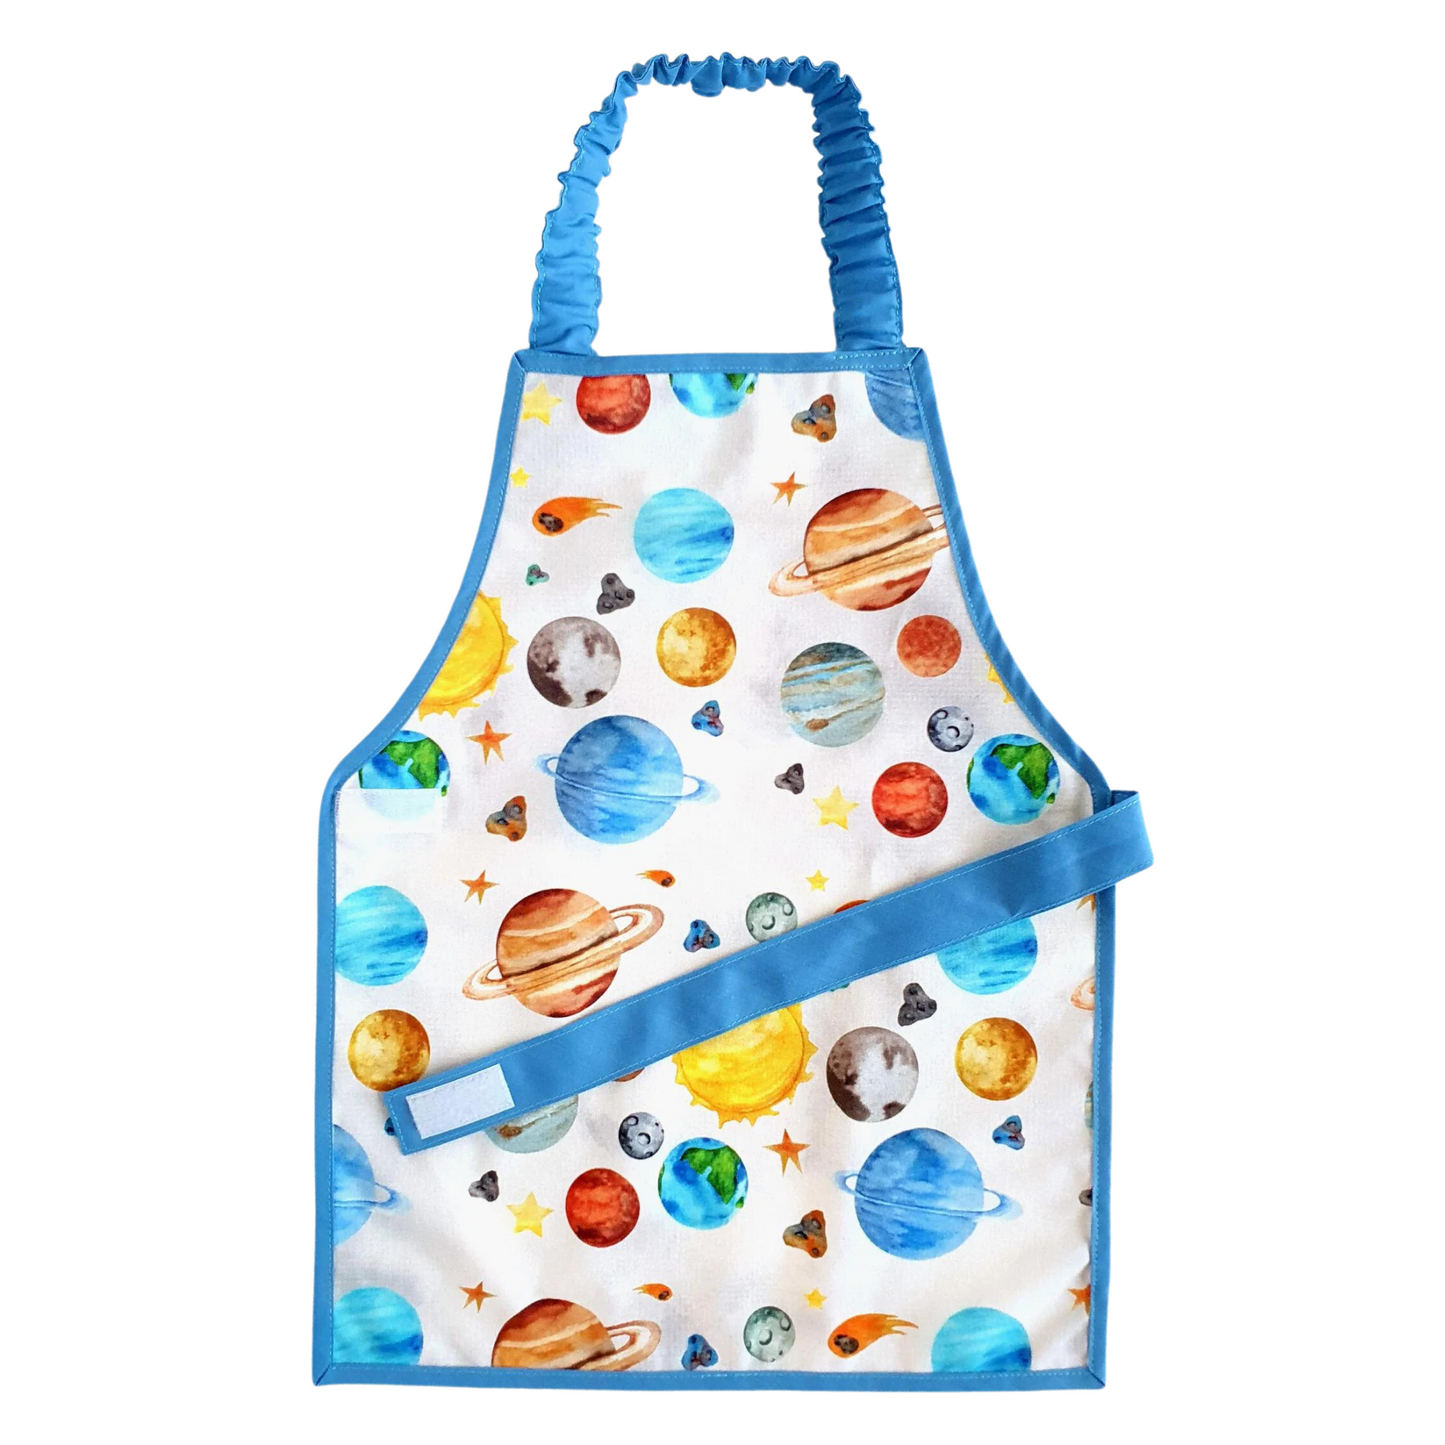 Montessori Apron Planets in Organic Oeko-Tex Cotton (water and stain resistant)